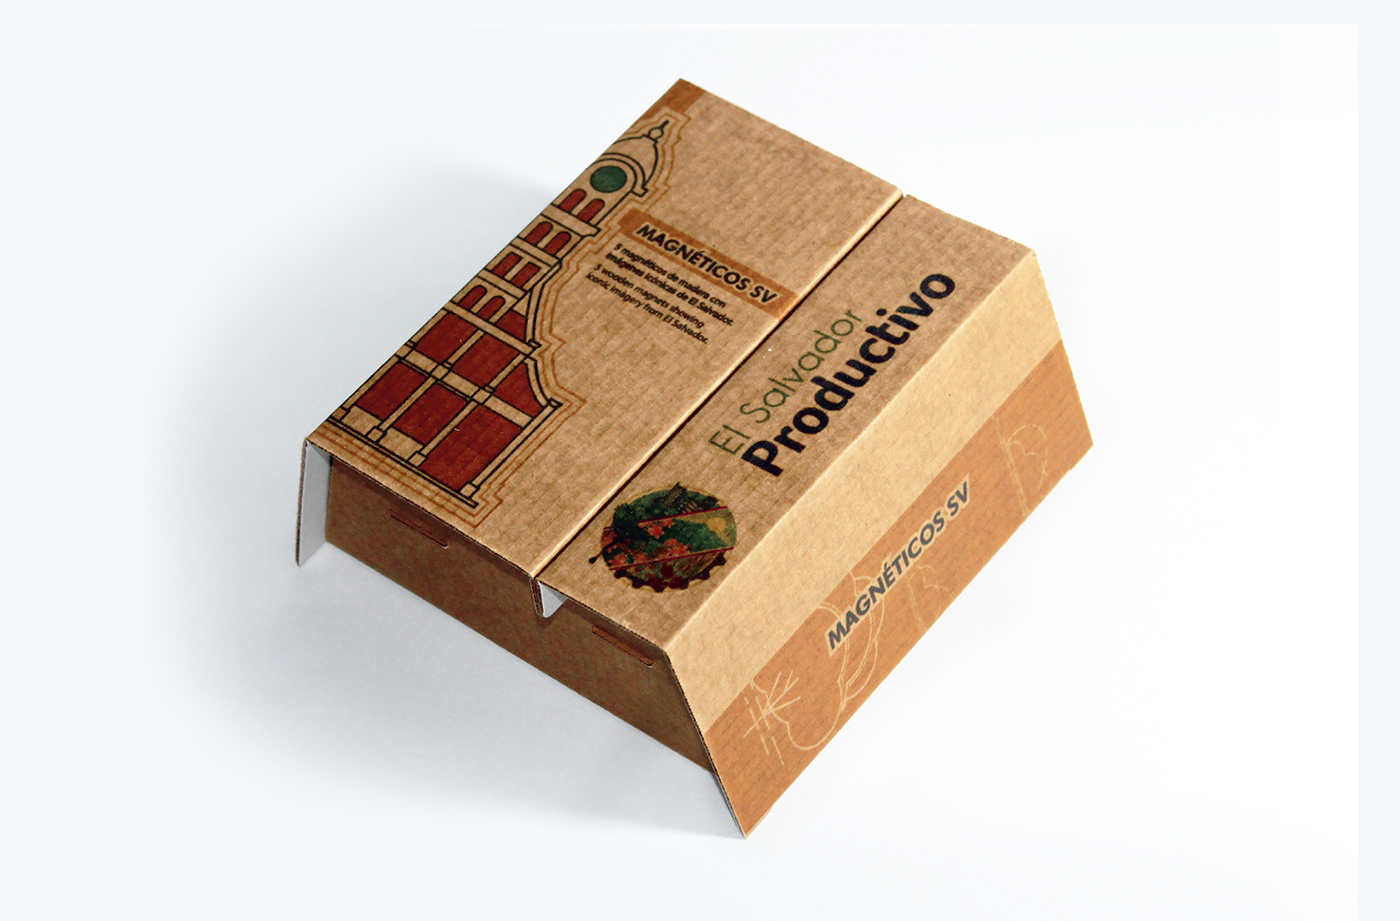 Packaging ilustration product souvenir plywood engraving architecture folding cardboard craft